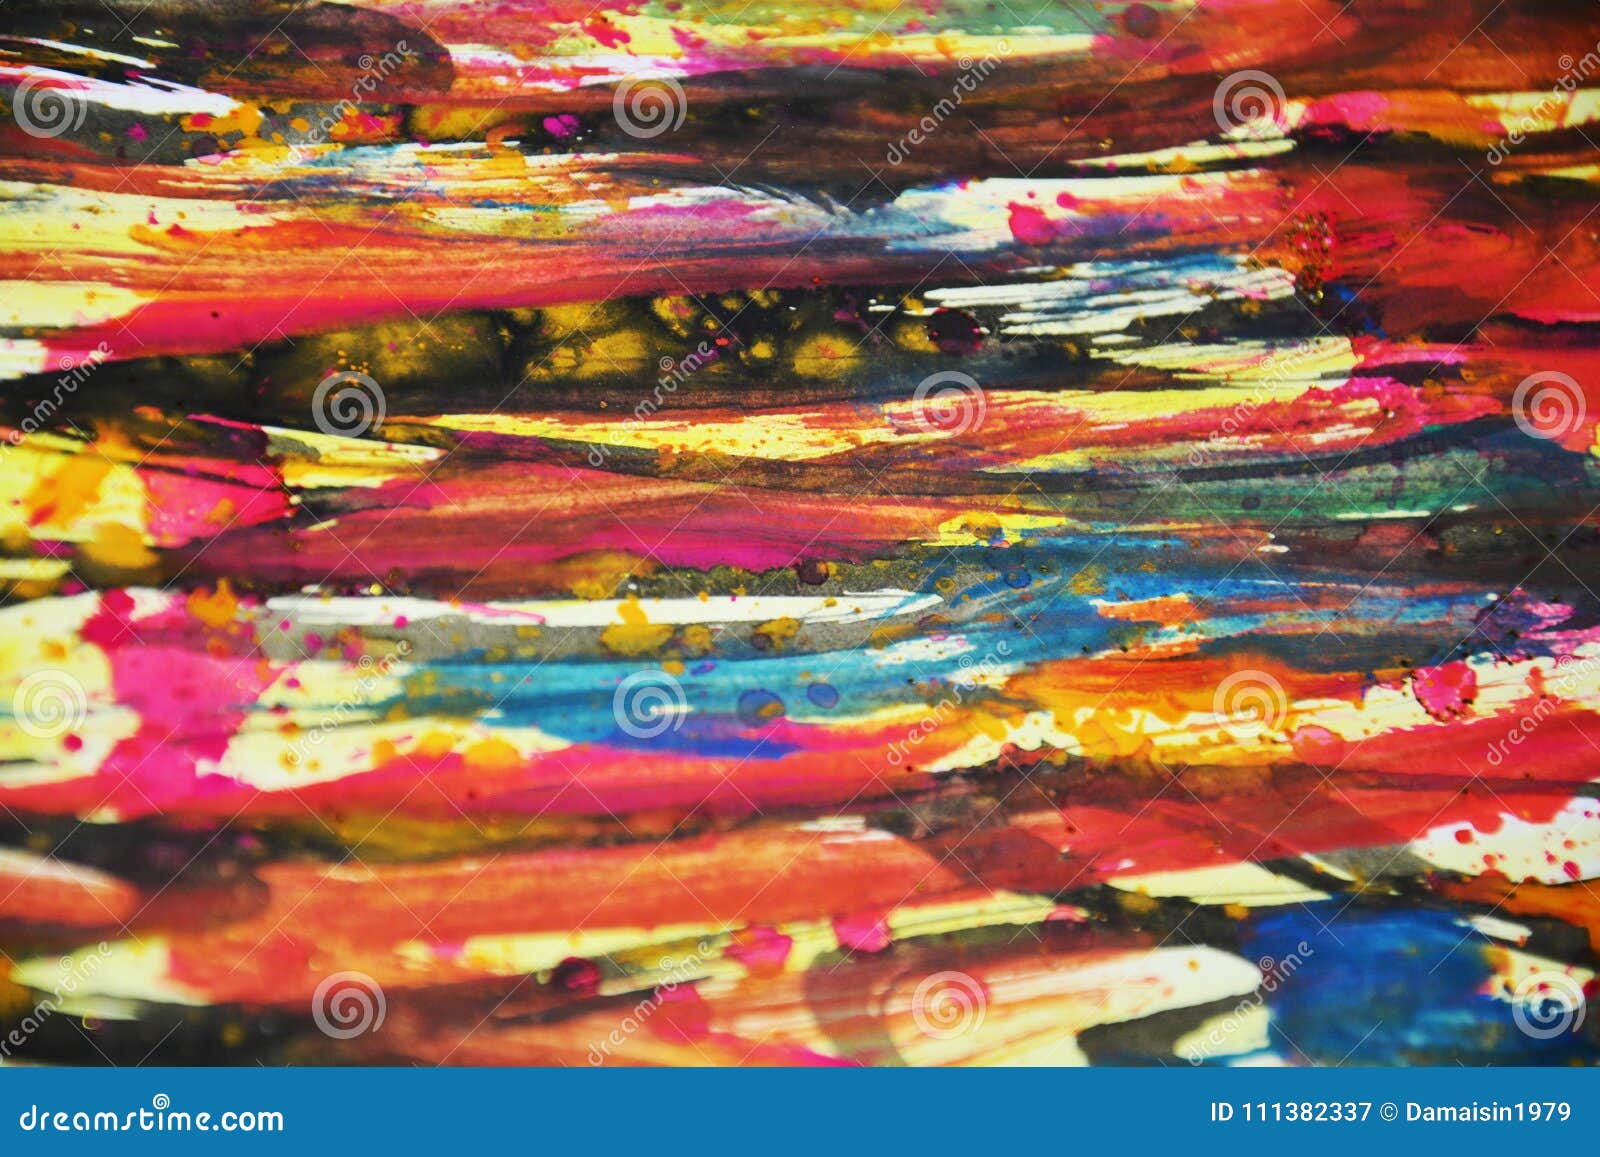 abstract colorful blurred colors, contrasts, waxy paint creative background